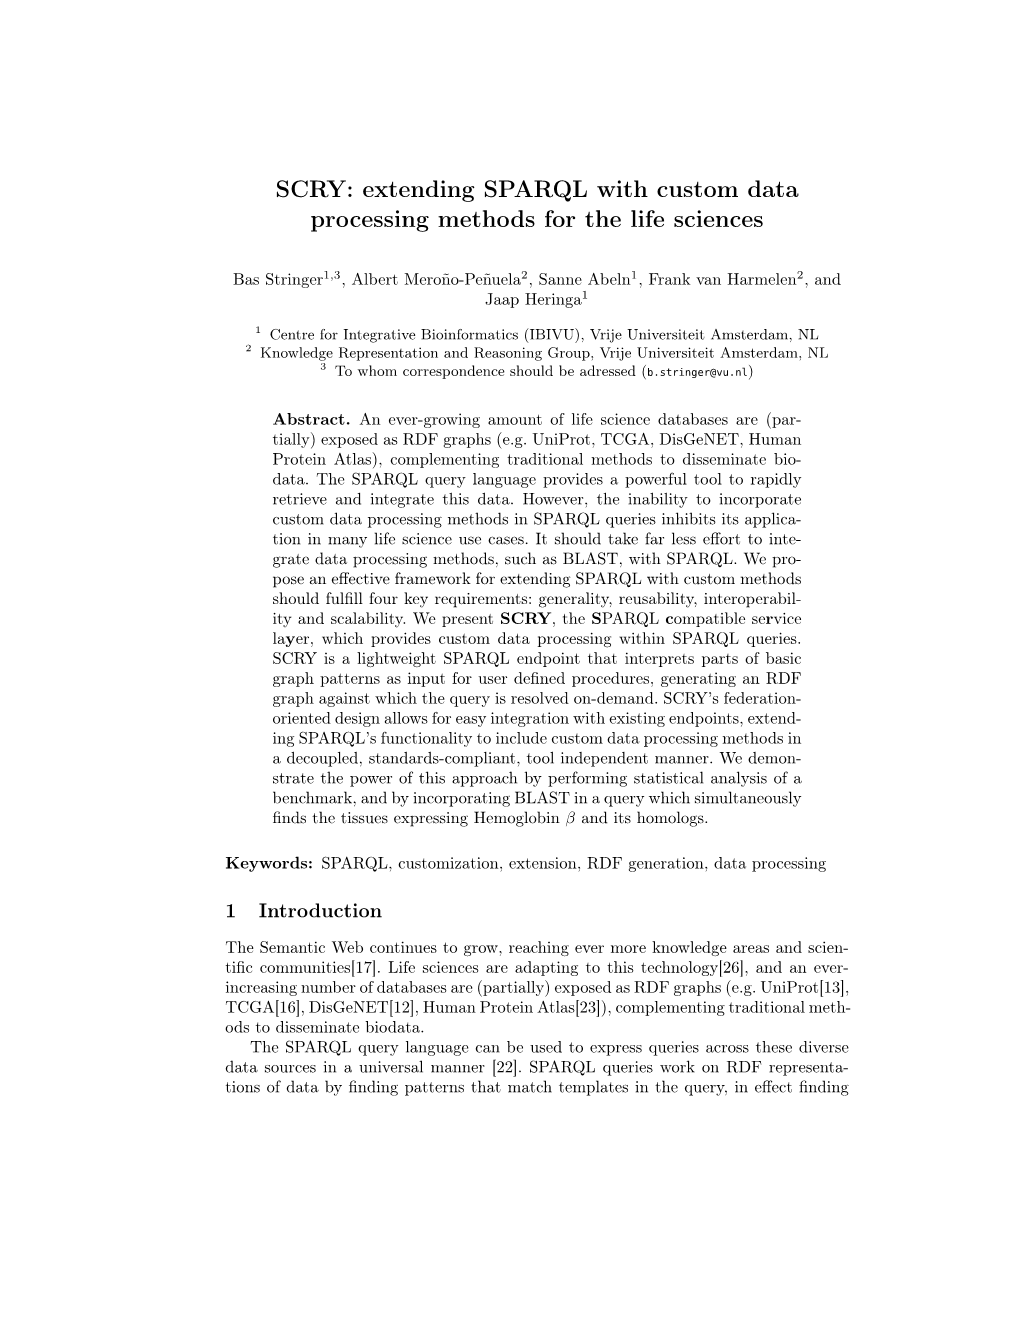 SCRY: Extending SPARQL with Custom Data Processing Methods for the Life Sciences